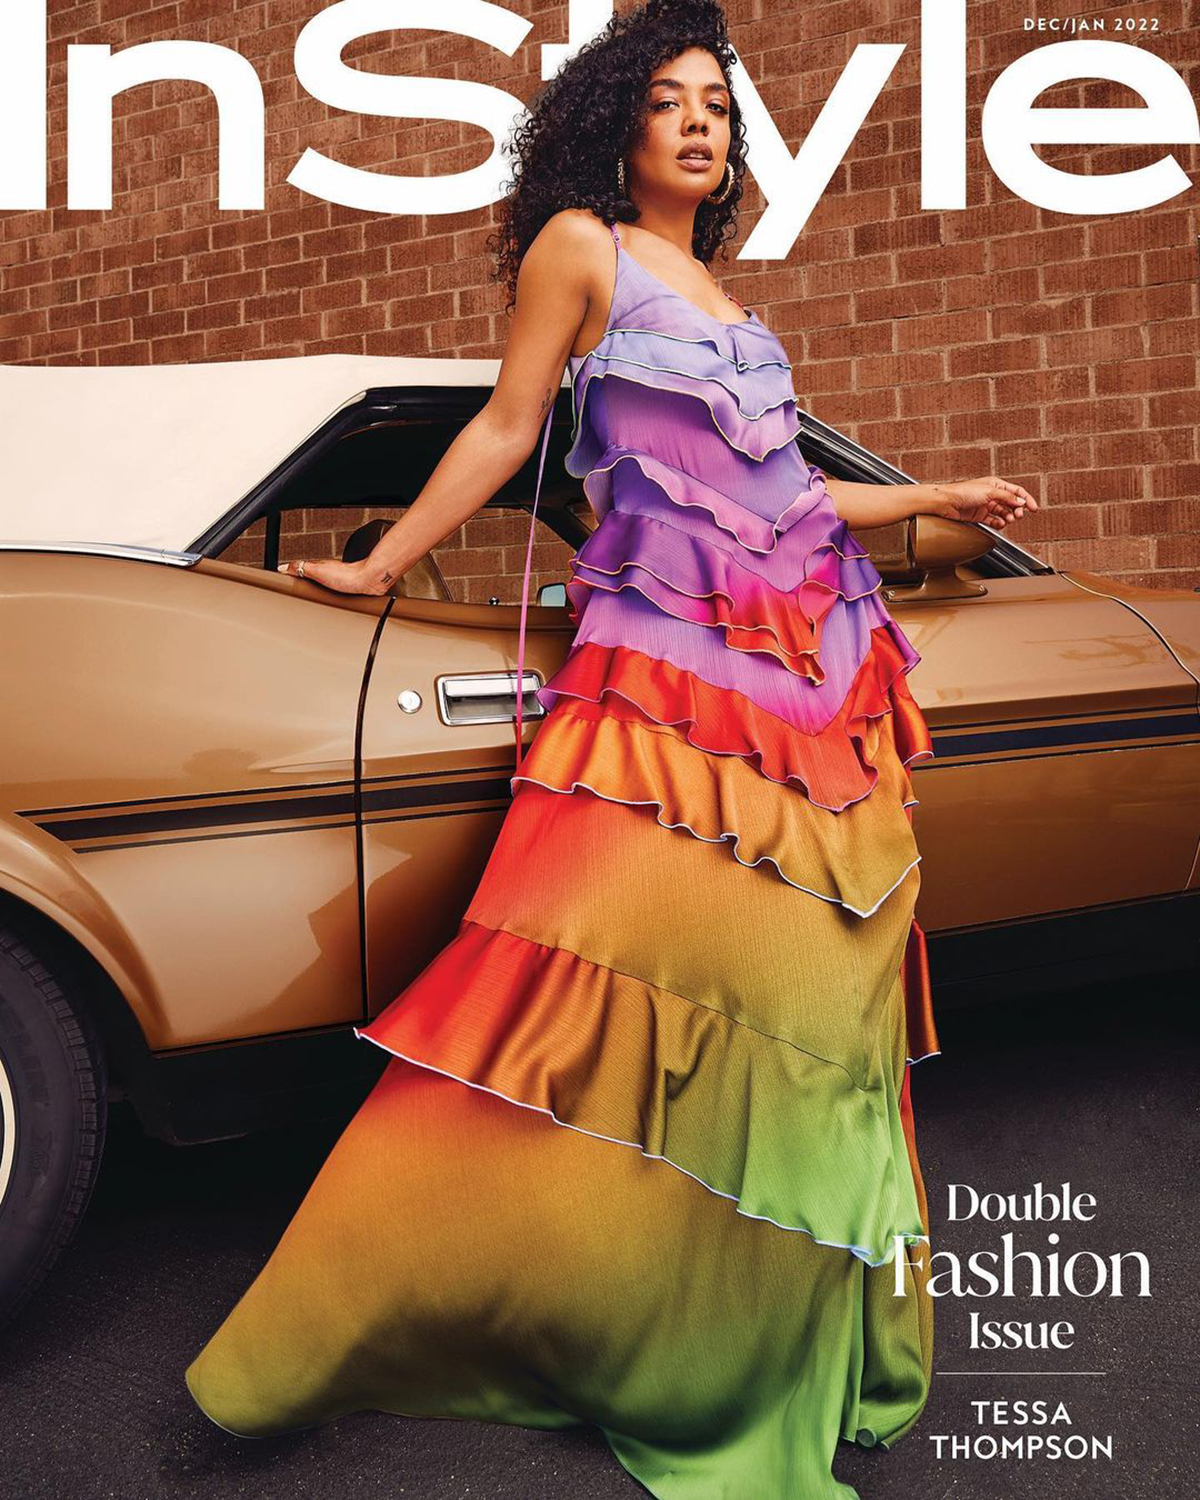 Tessa Thompson covers InStyle US December 2021/January 2022 Digital Edition by AB+DM